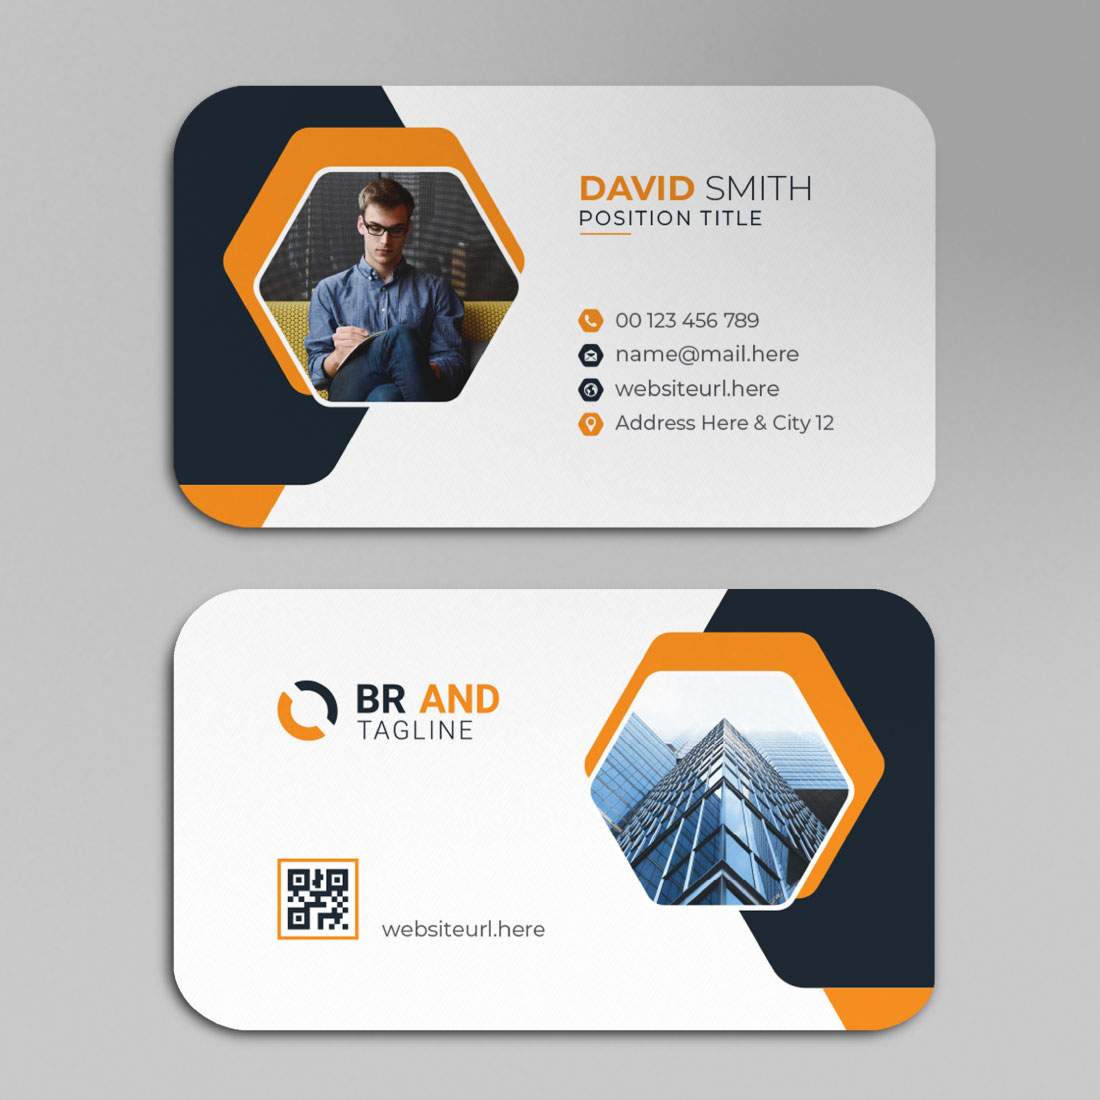 Two business cards with an orange and black design.